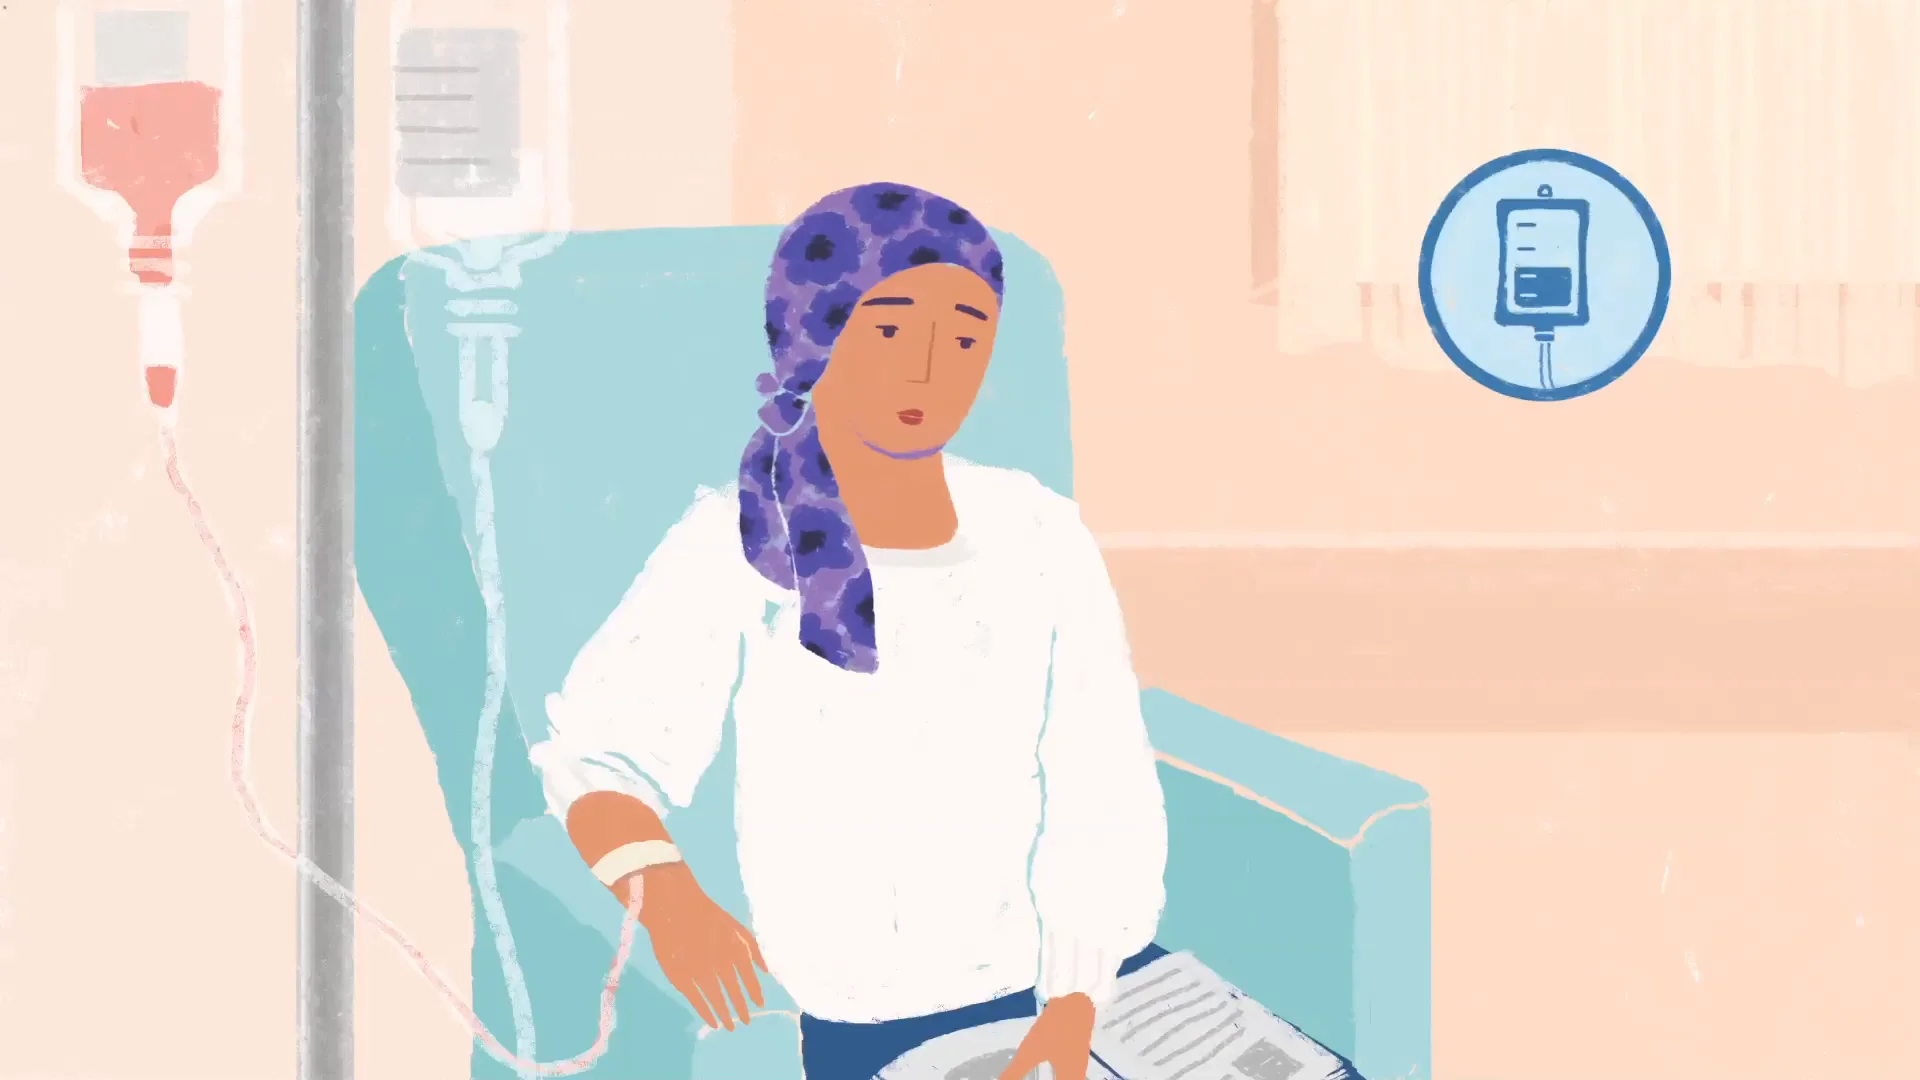 How Can You Advocate for the Best Breast Cancer Care? on Vimeo